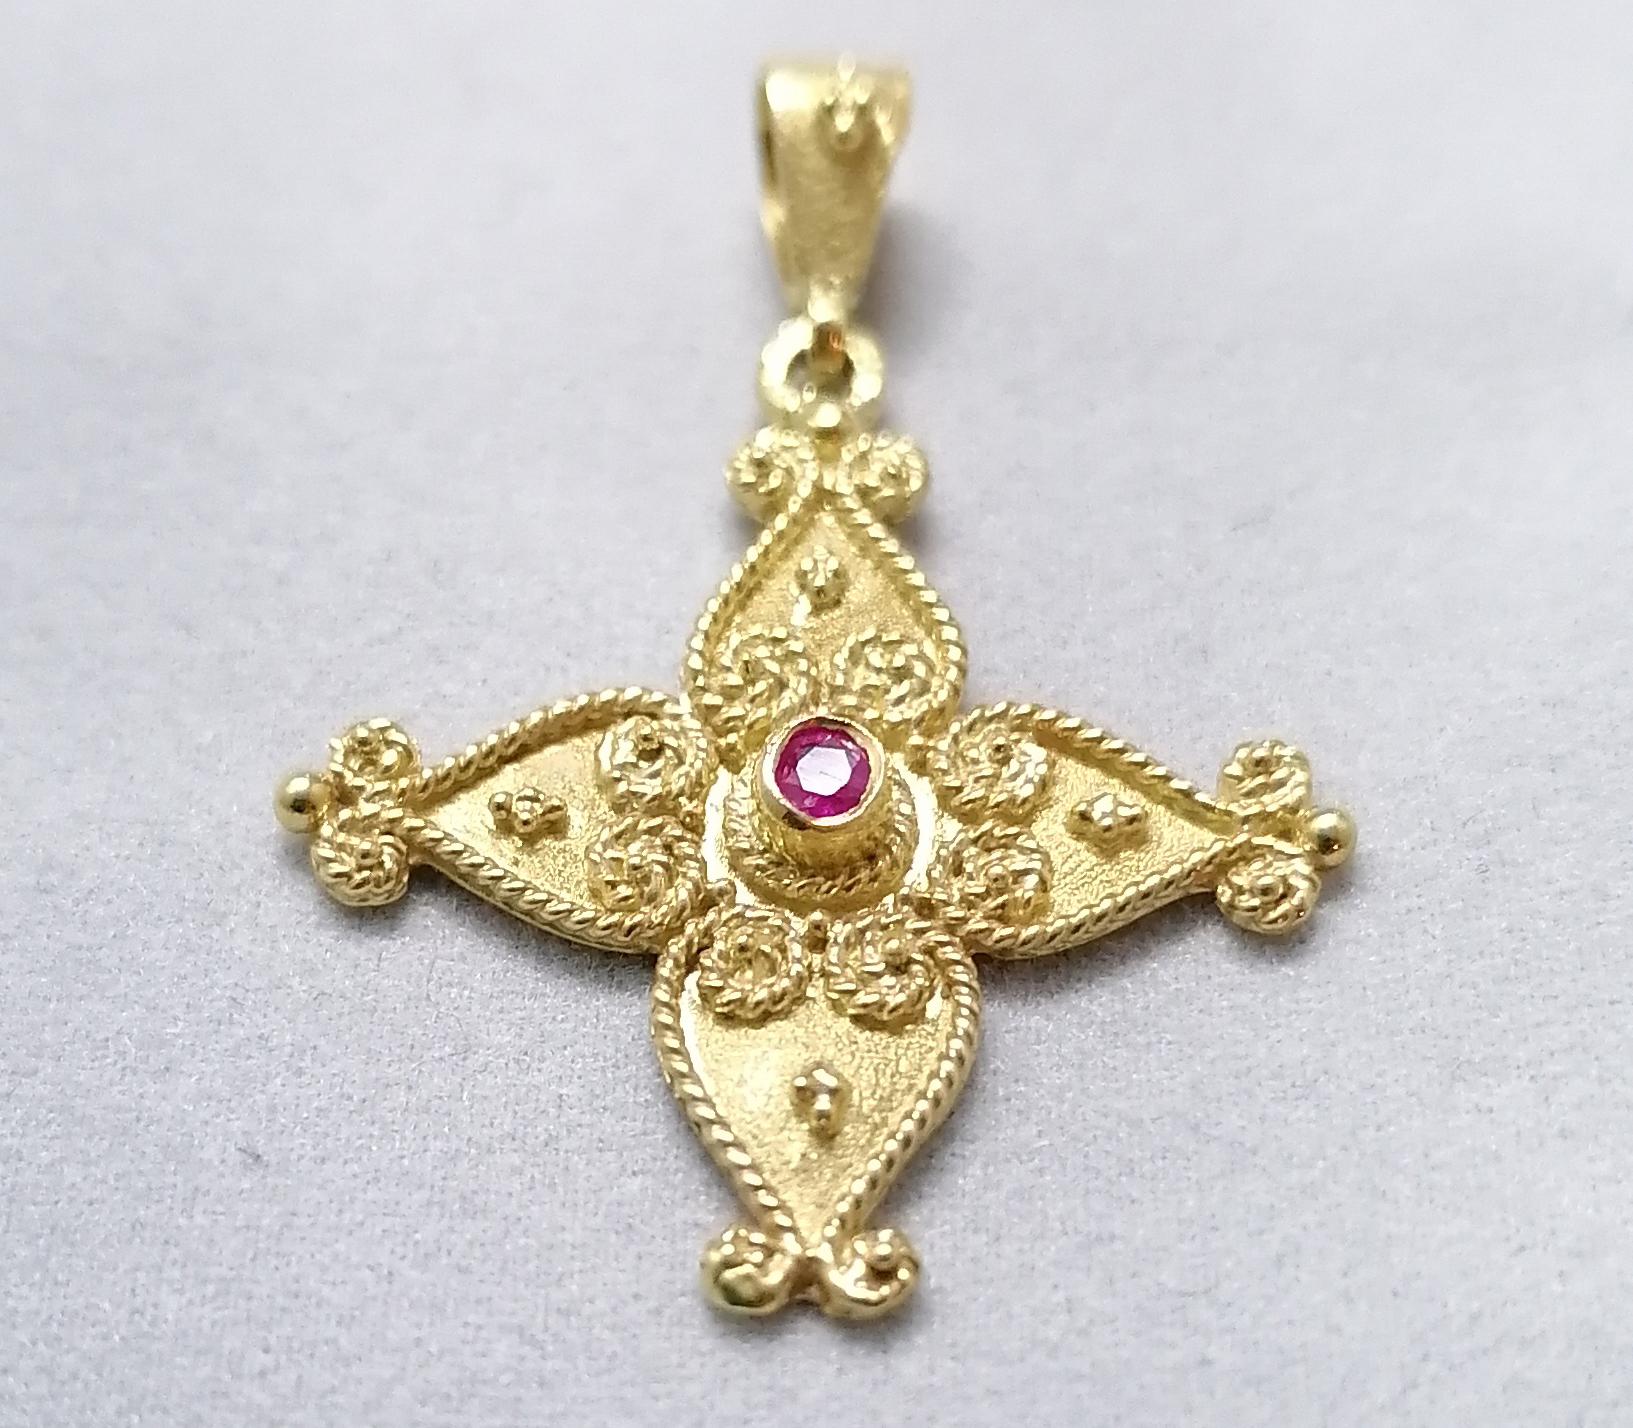 This S.Georgios solid 18 Karat Gold geometric Cross Necklace is handmade with microscopically decorated Byzantine-style granulation work and finished with a unique velvet background. This stunning cross pendant features a delicate brilliant-cut